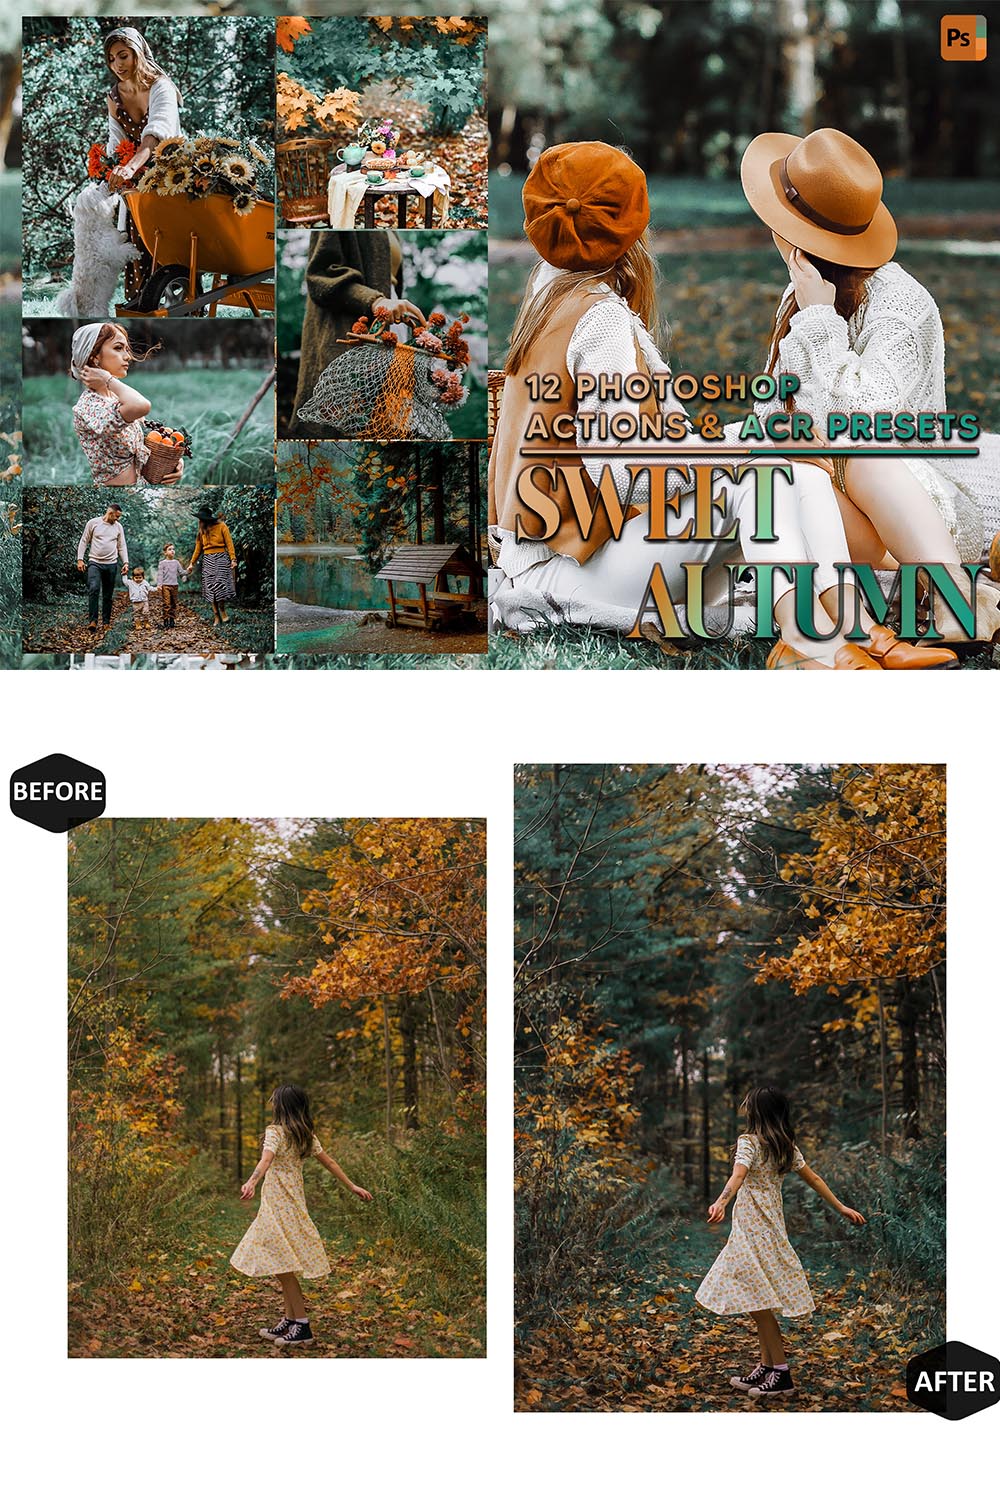 12 Photoshop Actions, Sweet Autumn Ps Action, Woodland ACR Preset, Fall Moody Ps Filter, Portrait And Lifestyle Theme For Instagram, Blogger pinterest preview image.